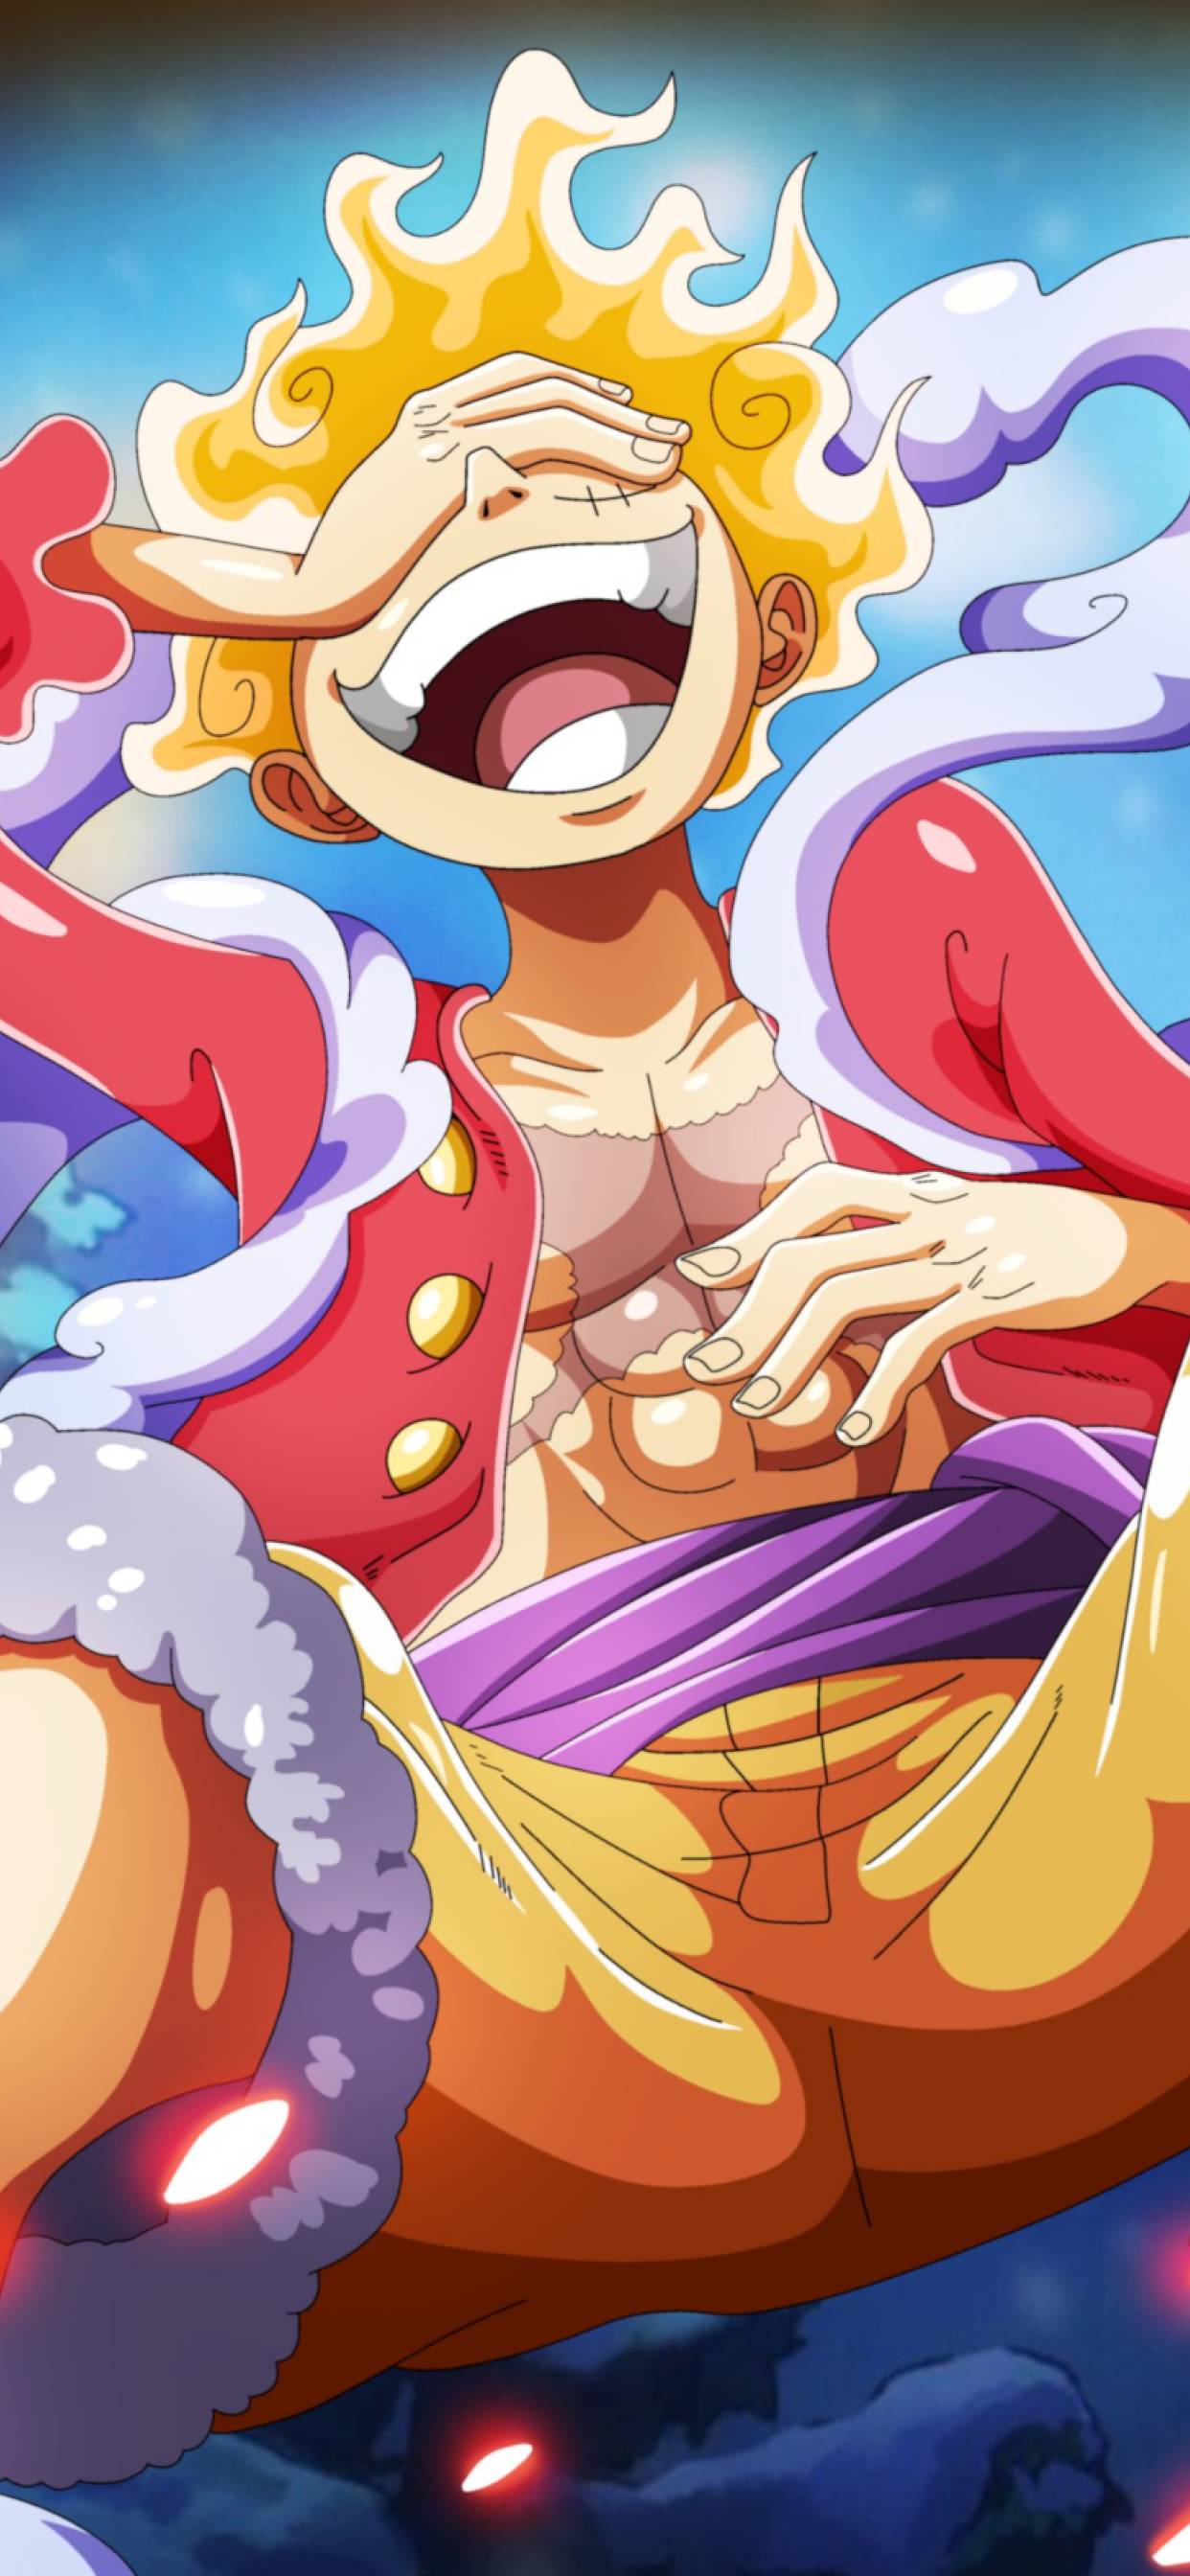 One piece anime character with a big smile - One Piece